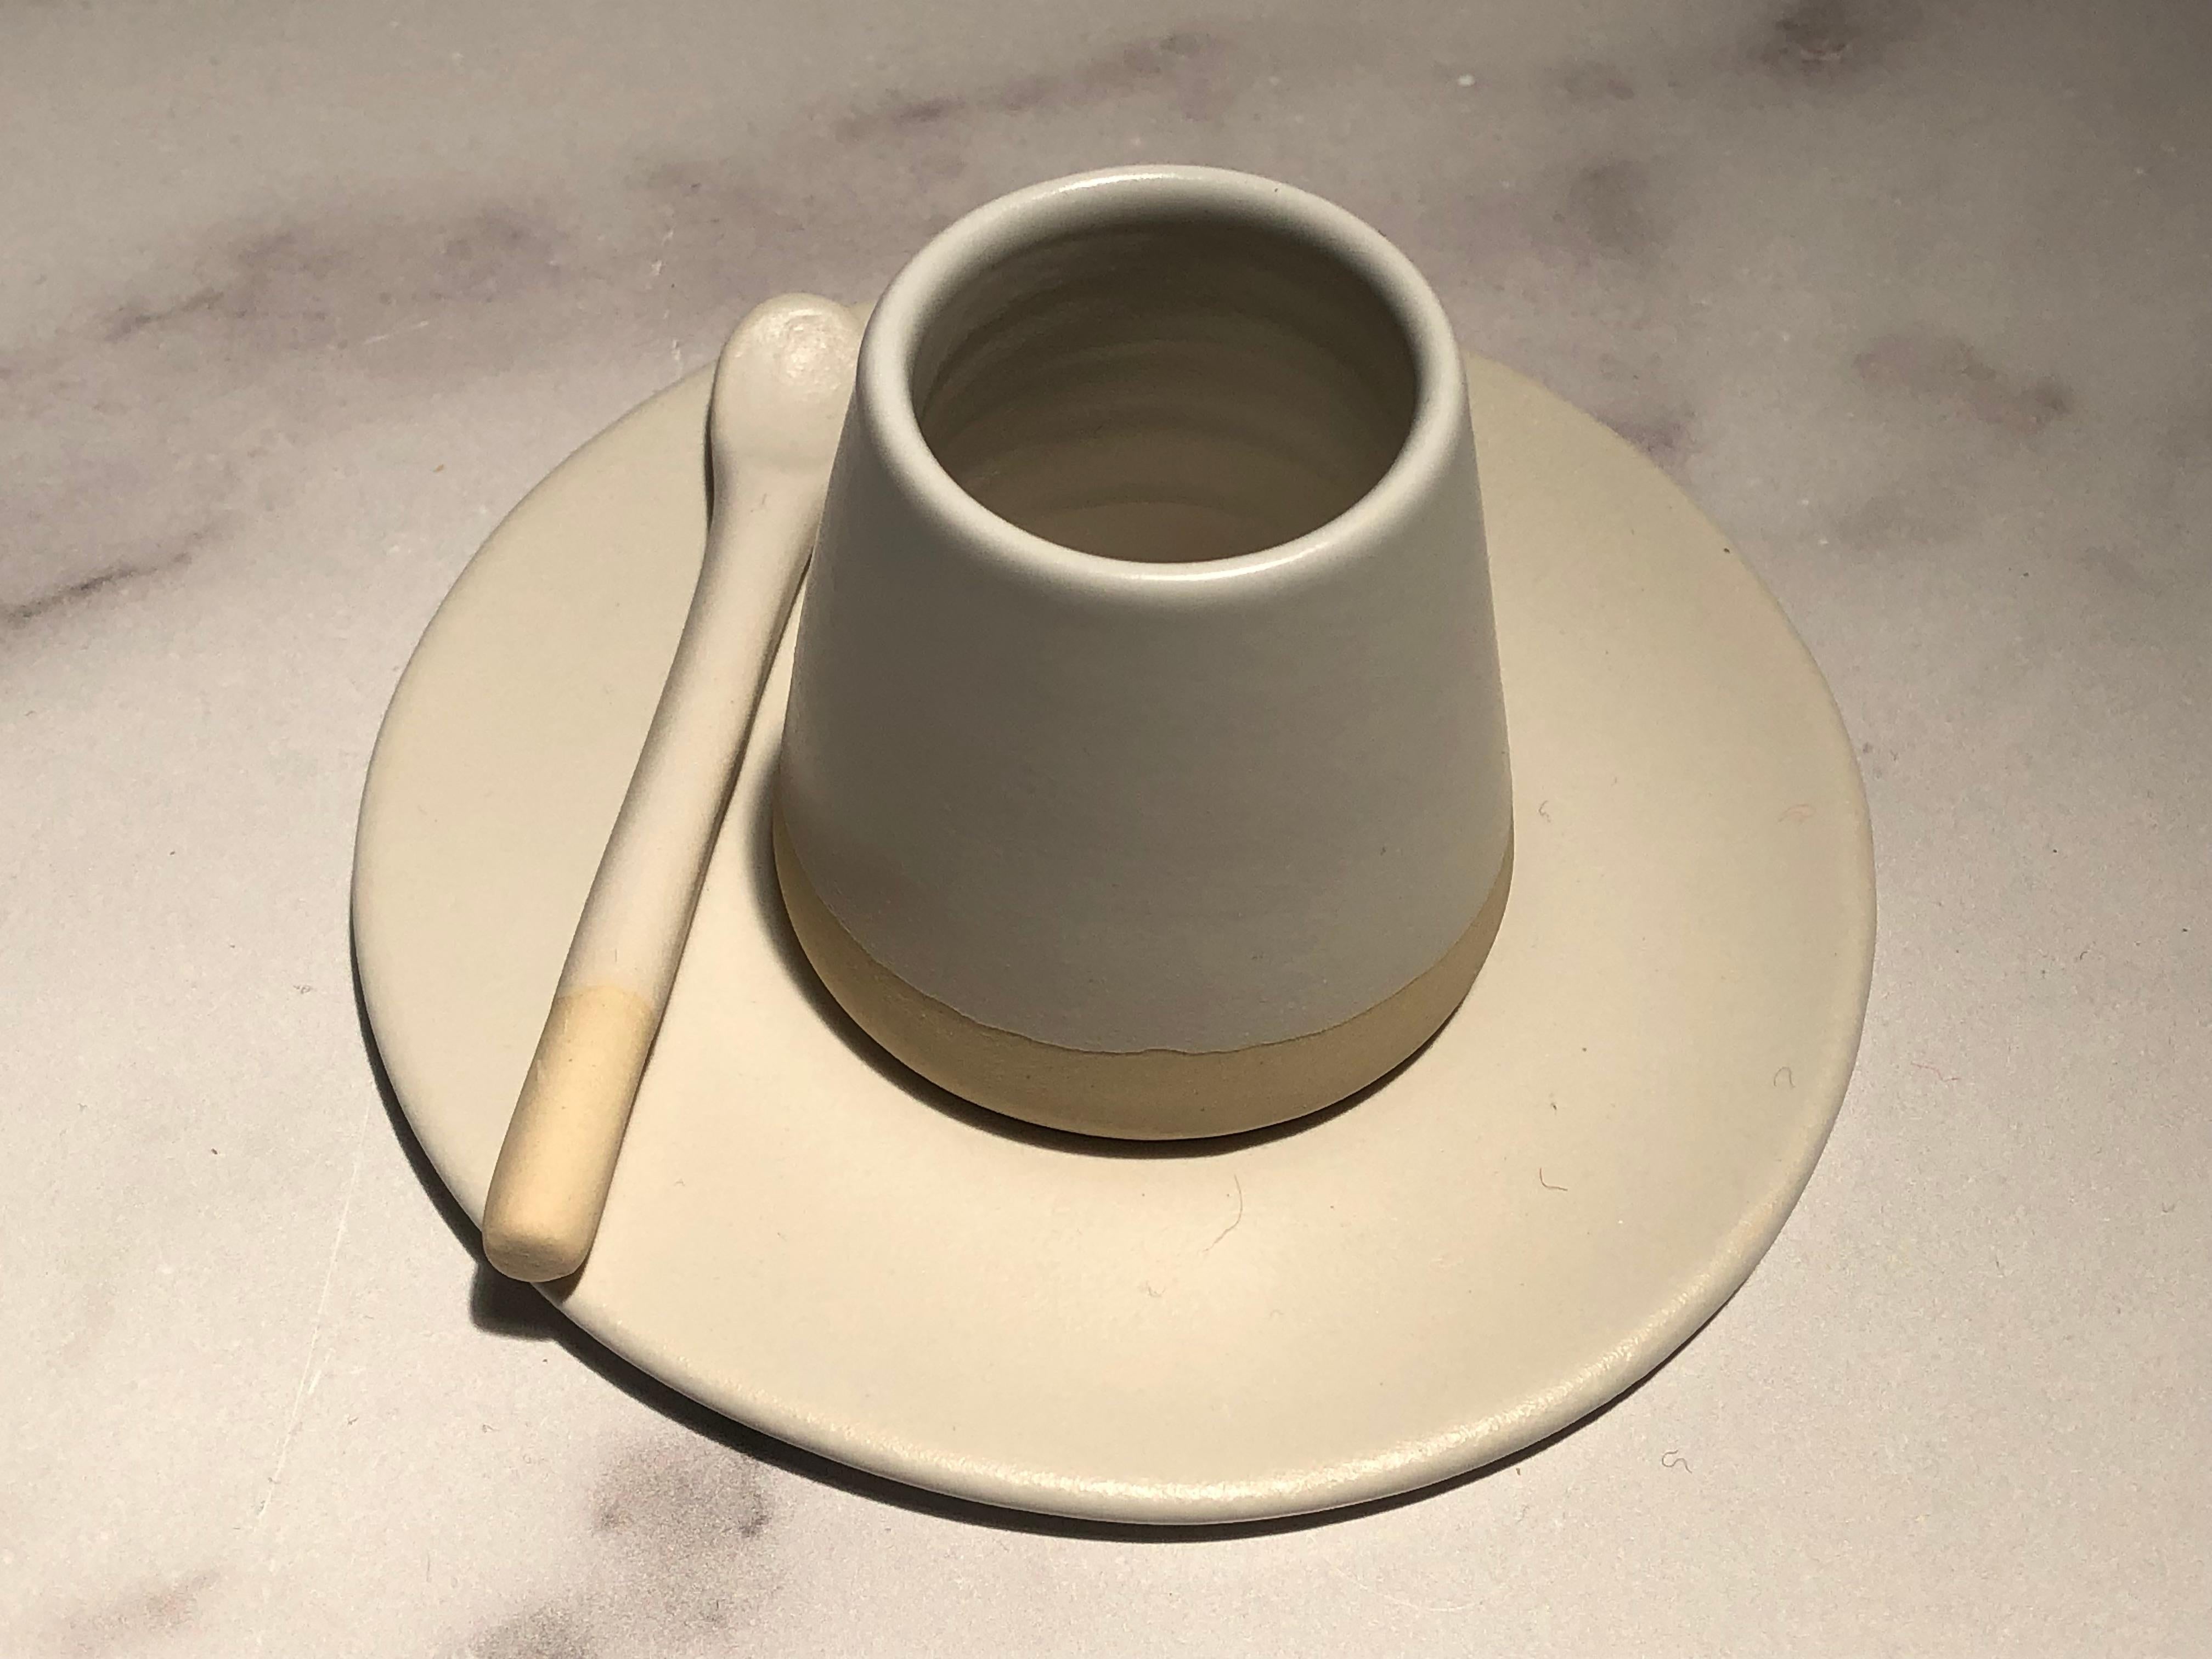 Hand-Crafted Handmade Ceramic Matte Saucer in White, in Stock